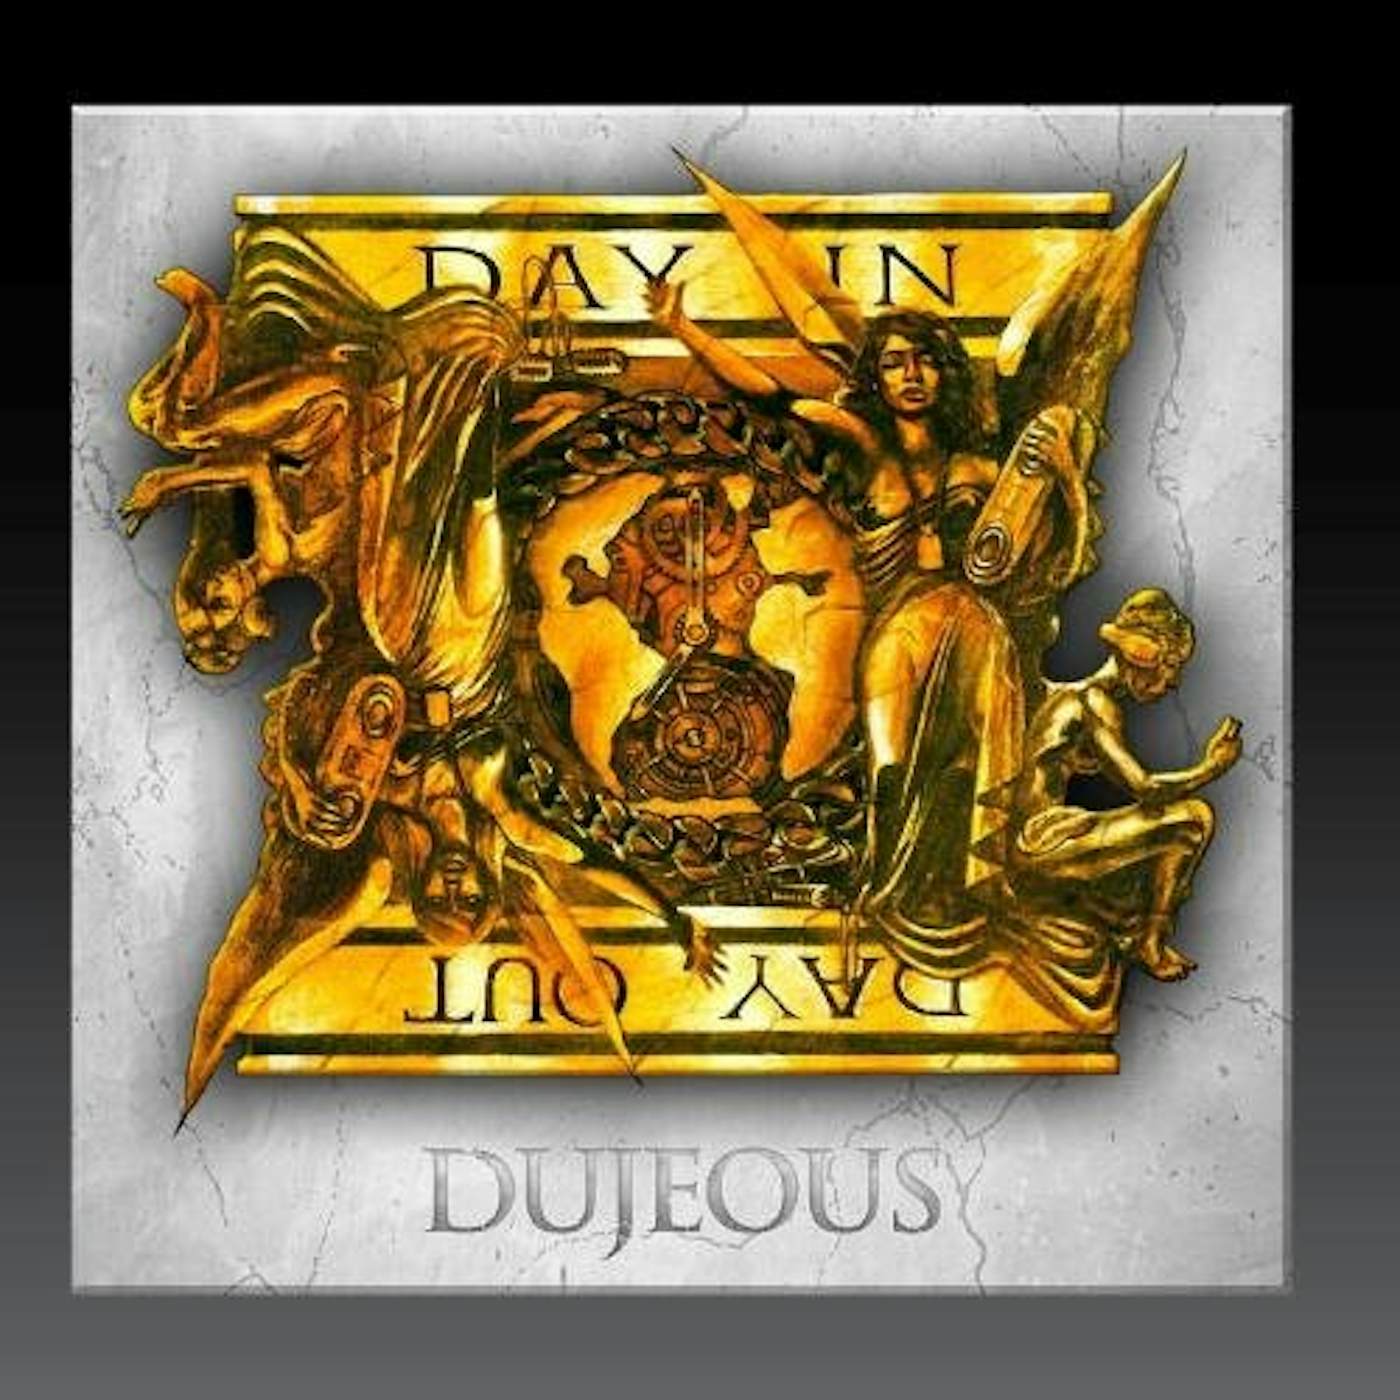 Dujeous DAY IN DAY OUT CD